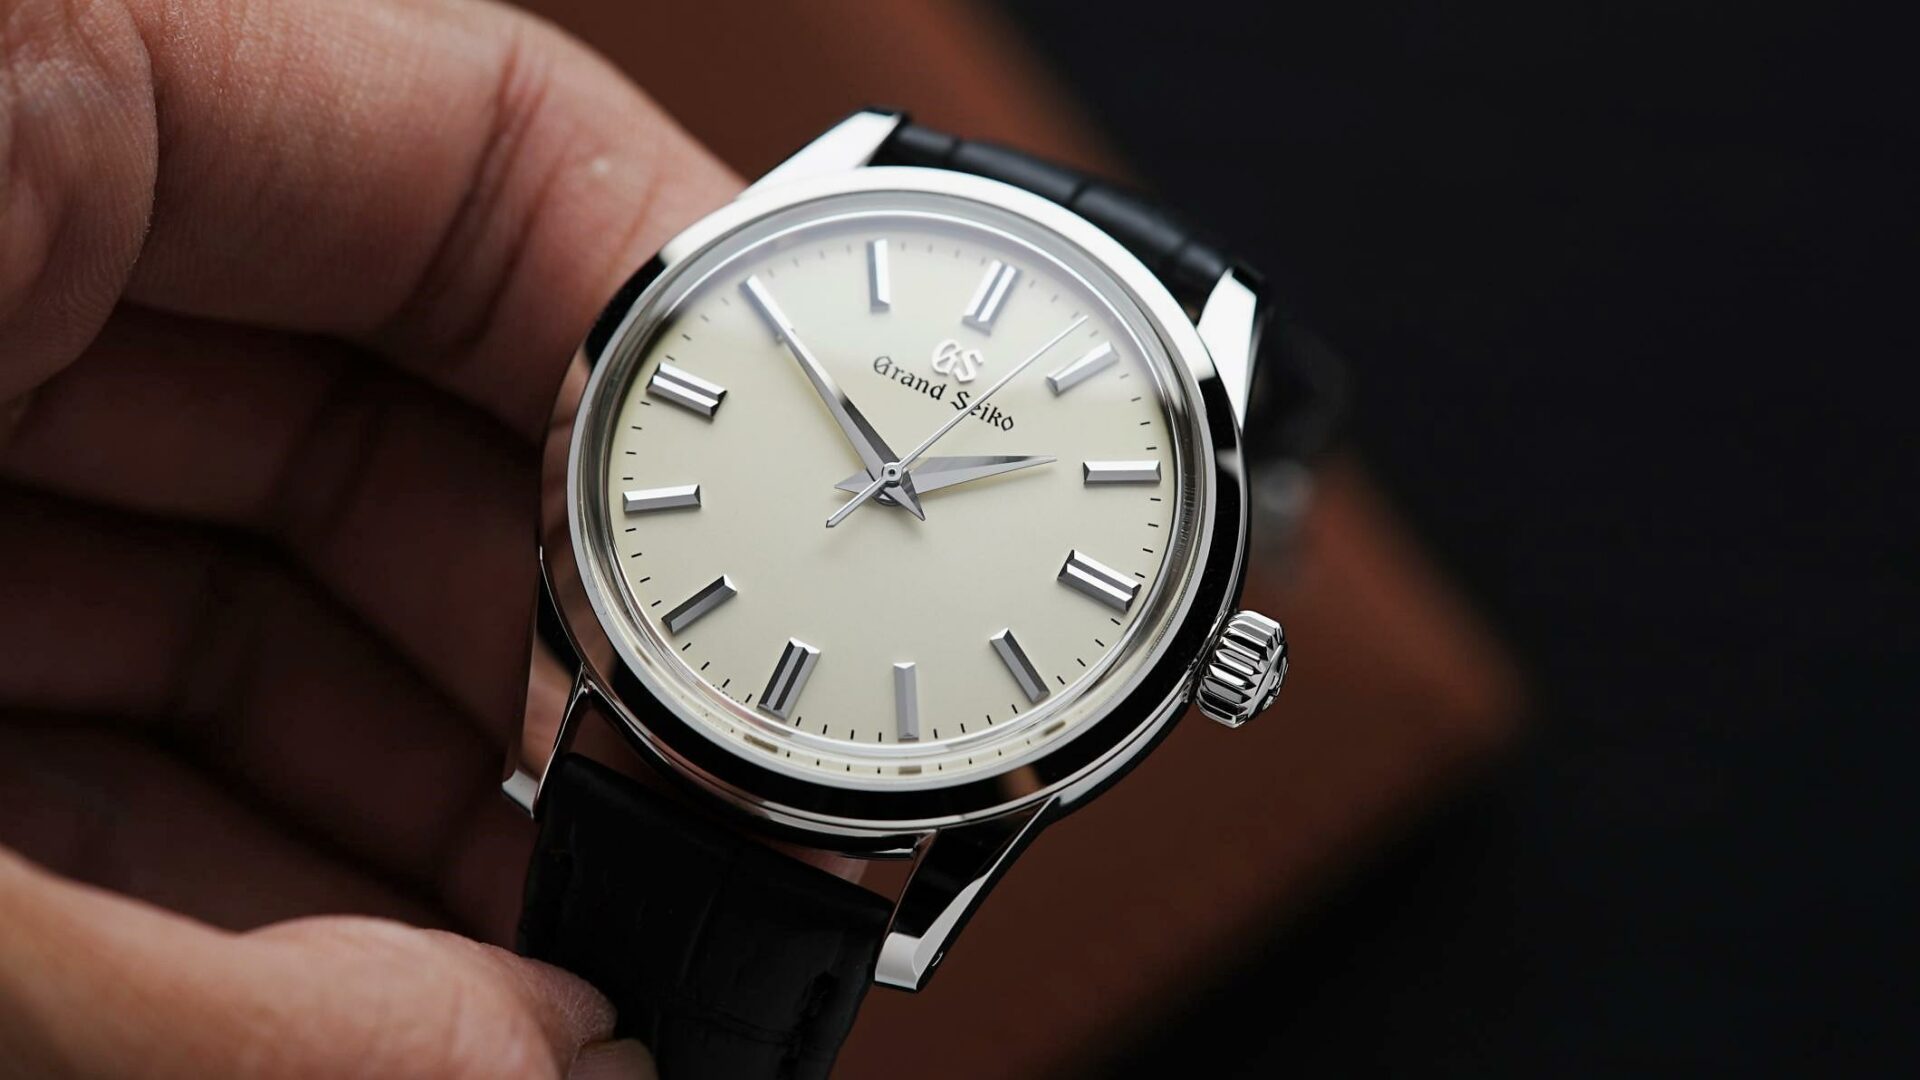 Grand Seiko SBGW231 being held in hand.